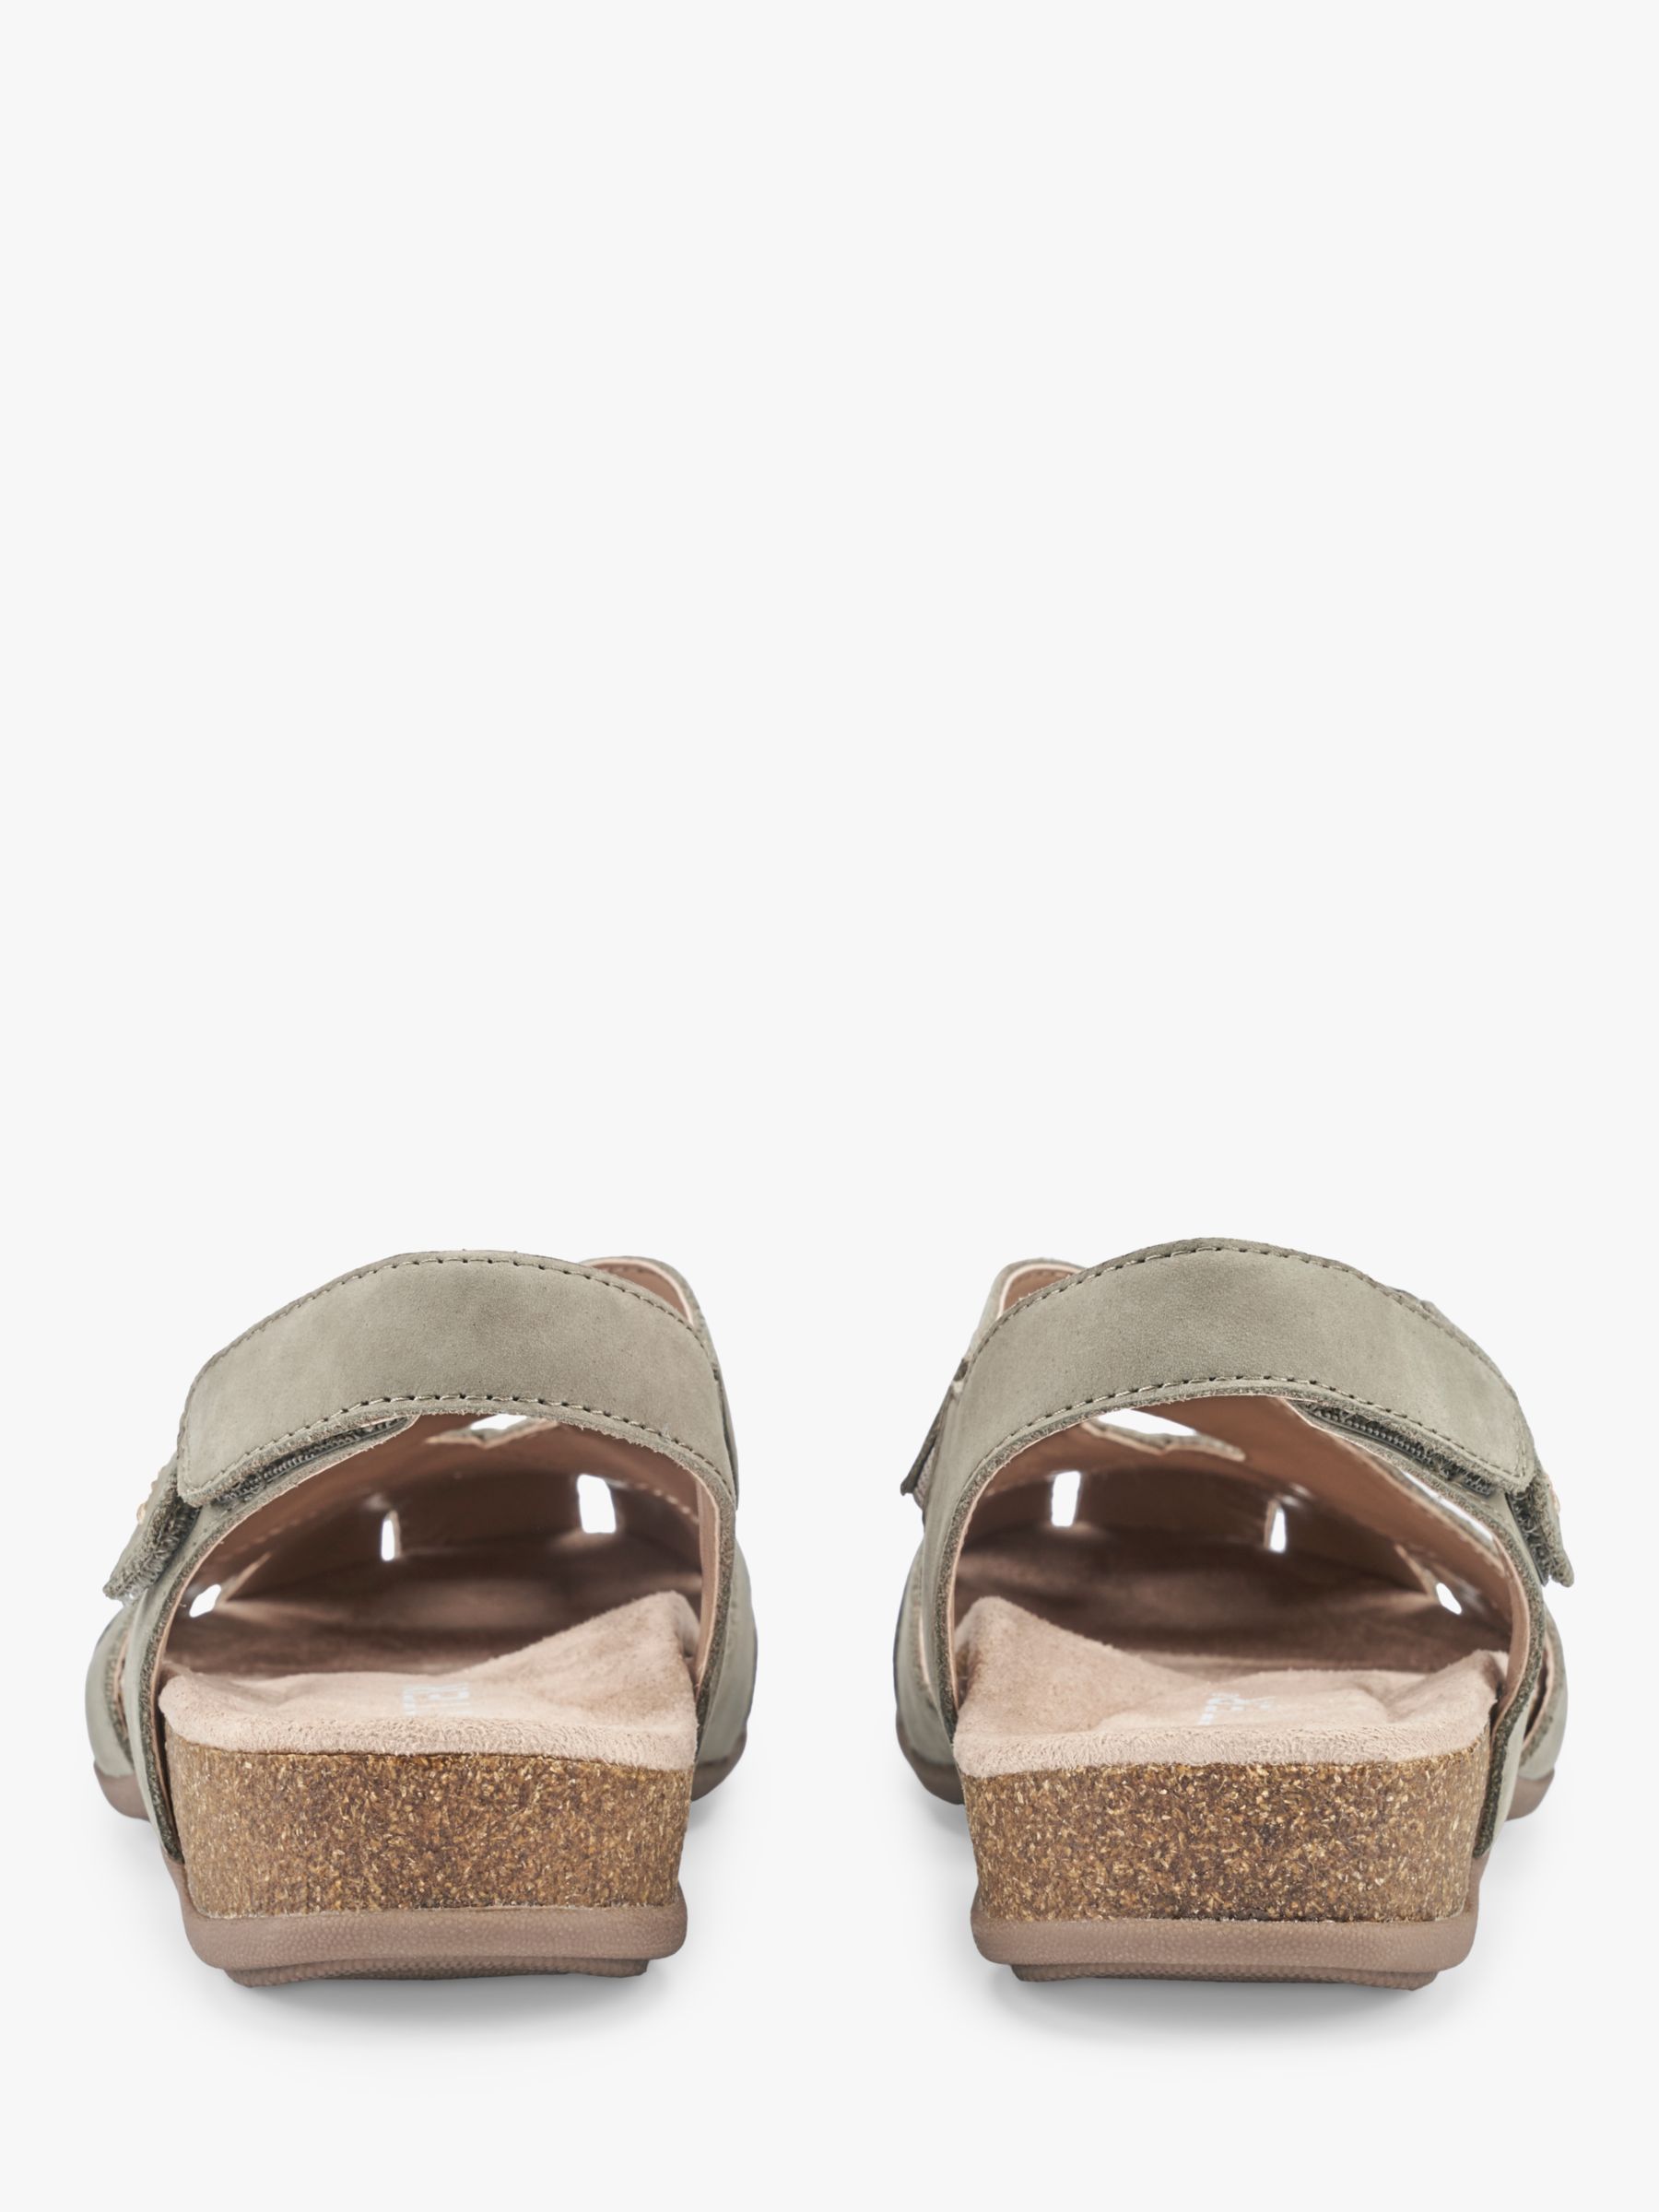 Buy Hotter Catskill II Closed Toe Sandals Online at johnlewis.com